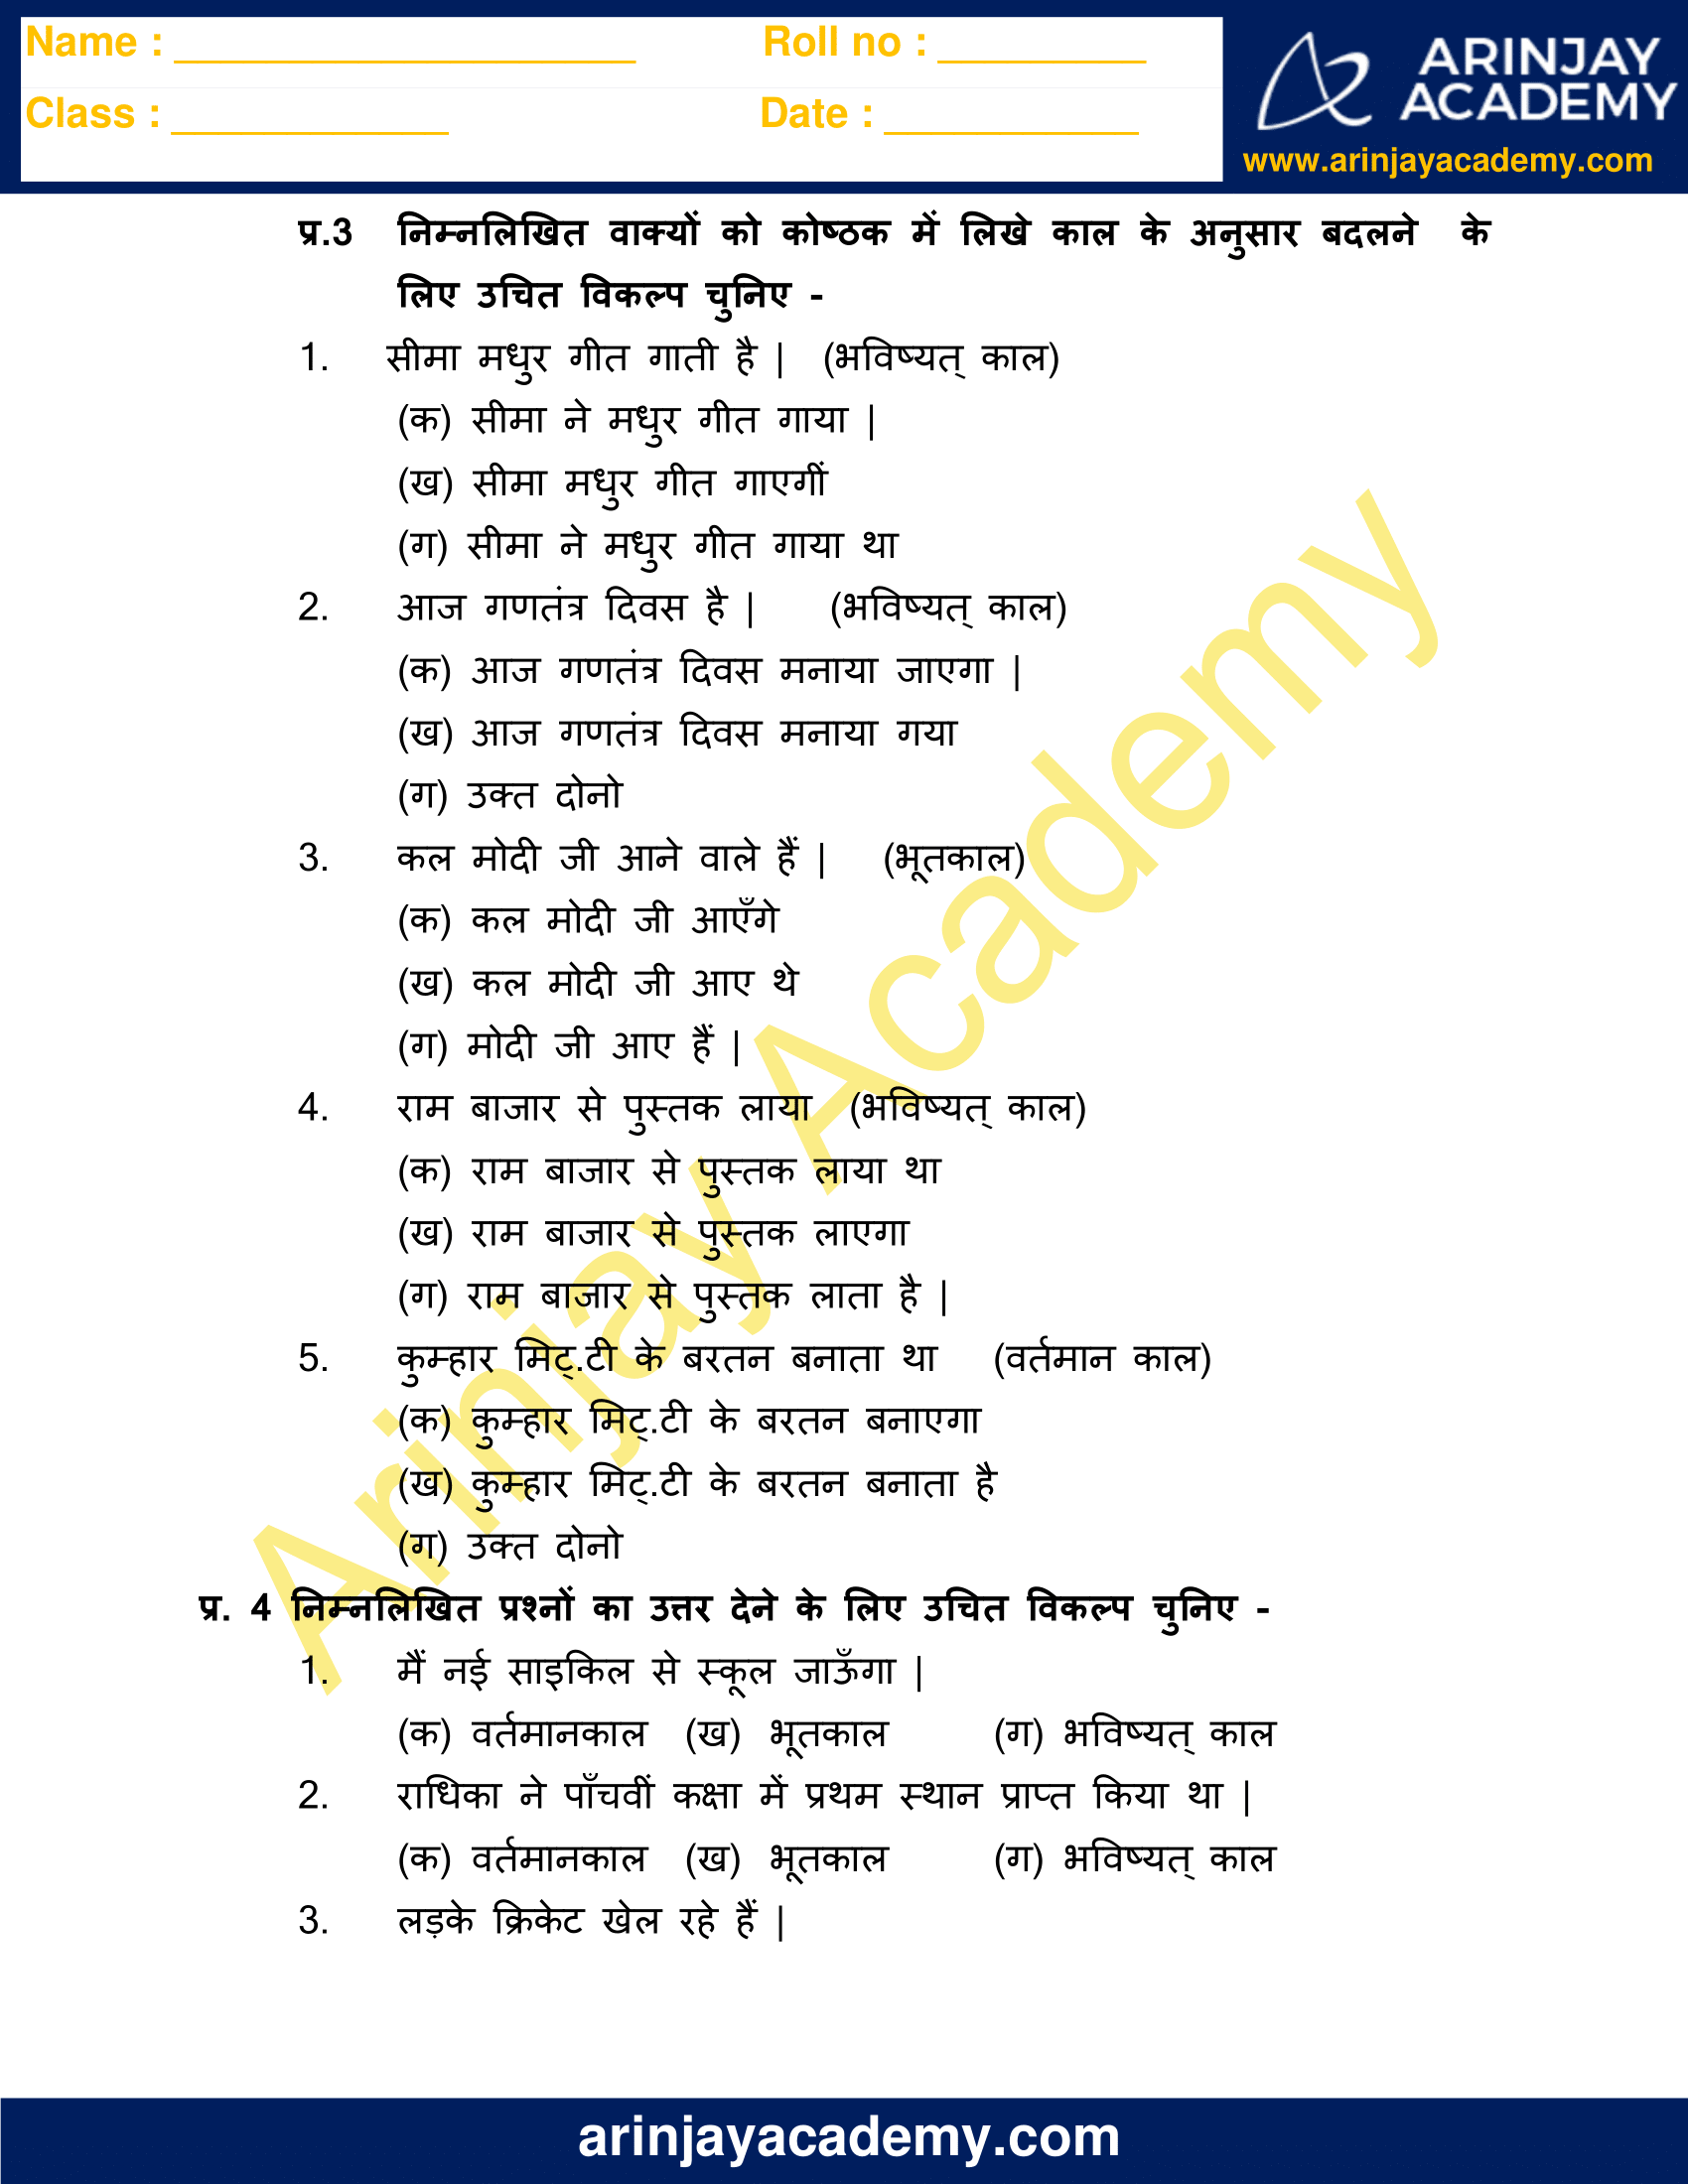 Kaal Worksheet in Hindi for Class 5 - Free and Printable - Arinjay Academy